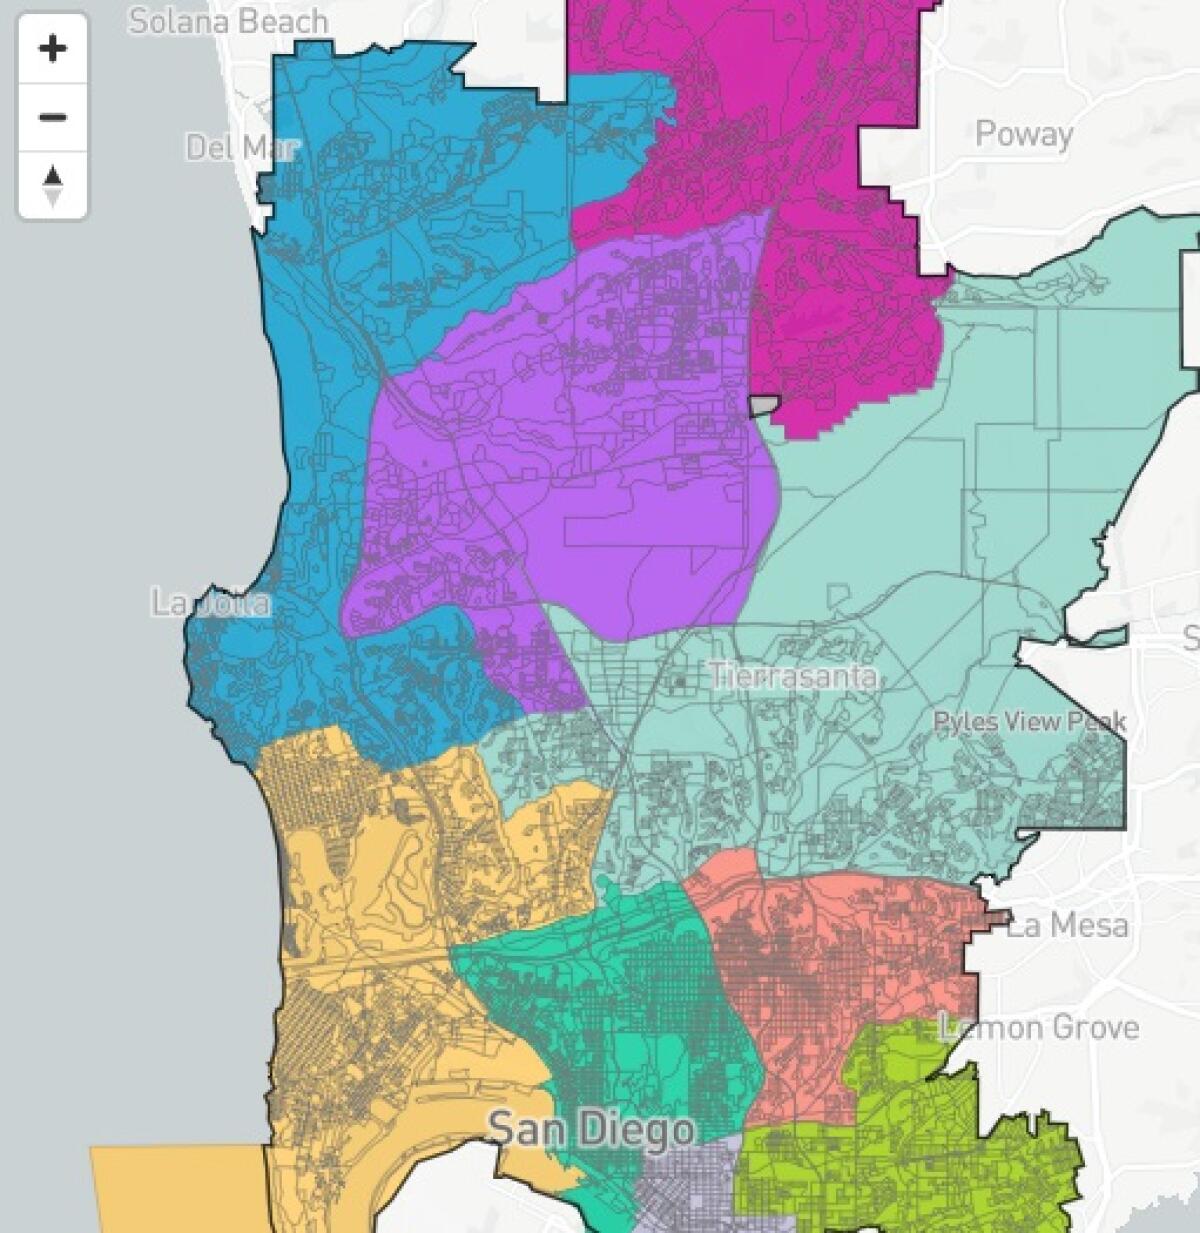 The first draft of a preliminary map shows San Diego's City Council District 1, which includes La Jolla, in blue. 